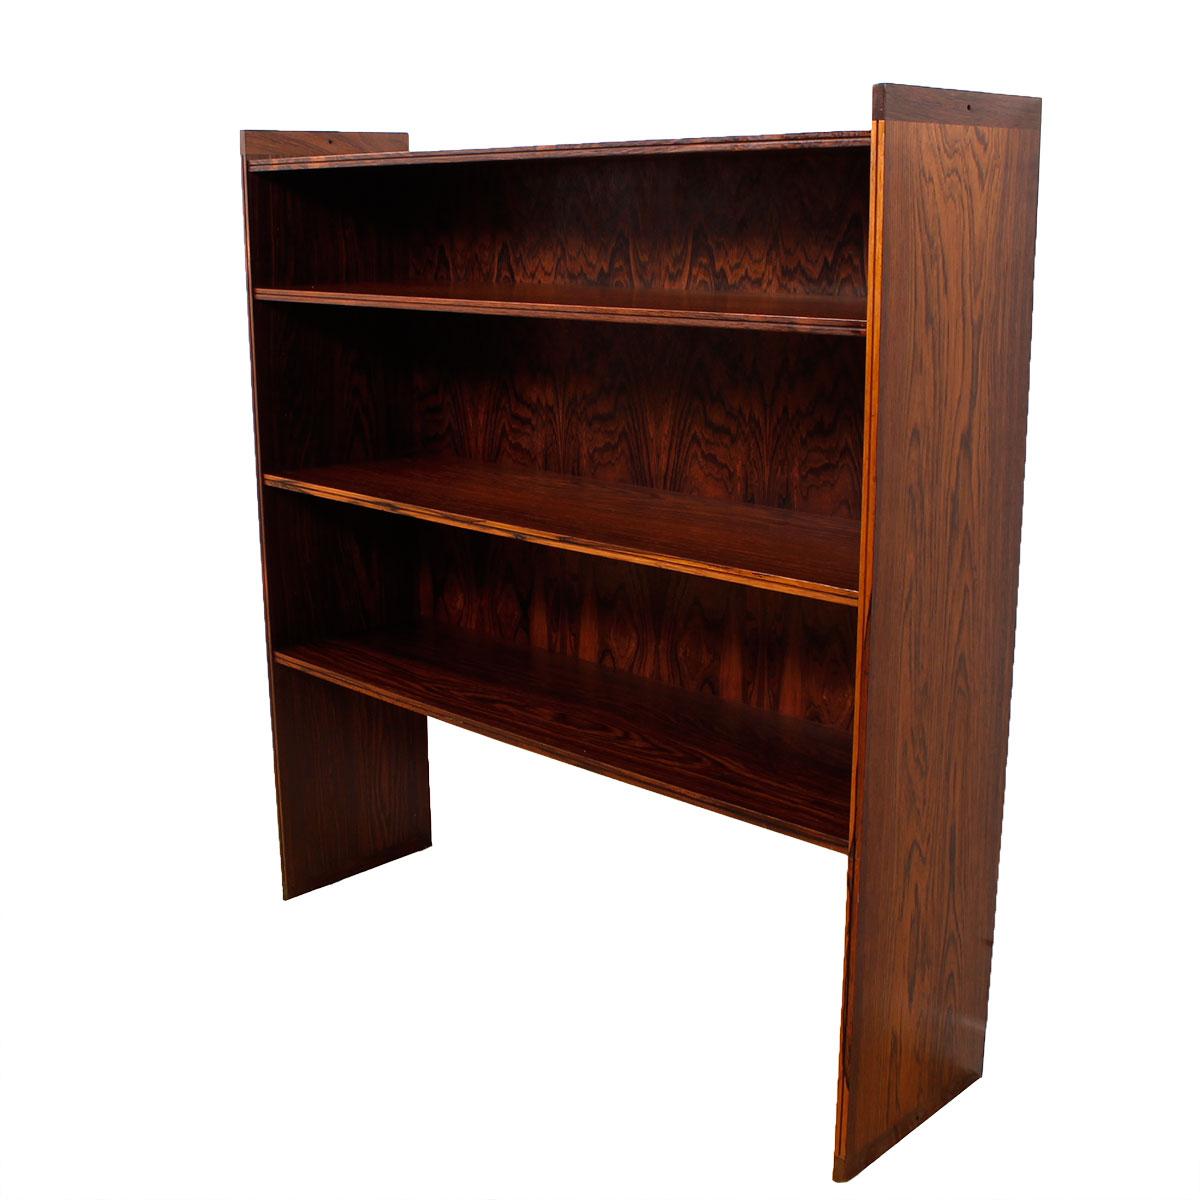 From the Royal Danish Embassy in Washington, DC we are pleased to offer this lovely bookcase by Grete Jalk. Incredible figuring in the rosewood grain. Can be placed directly on the floor or placed on top of another piece, such as a rosewood cabinet.